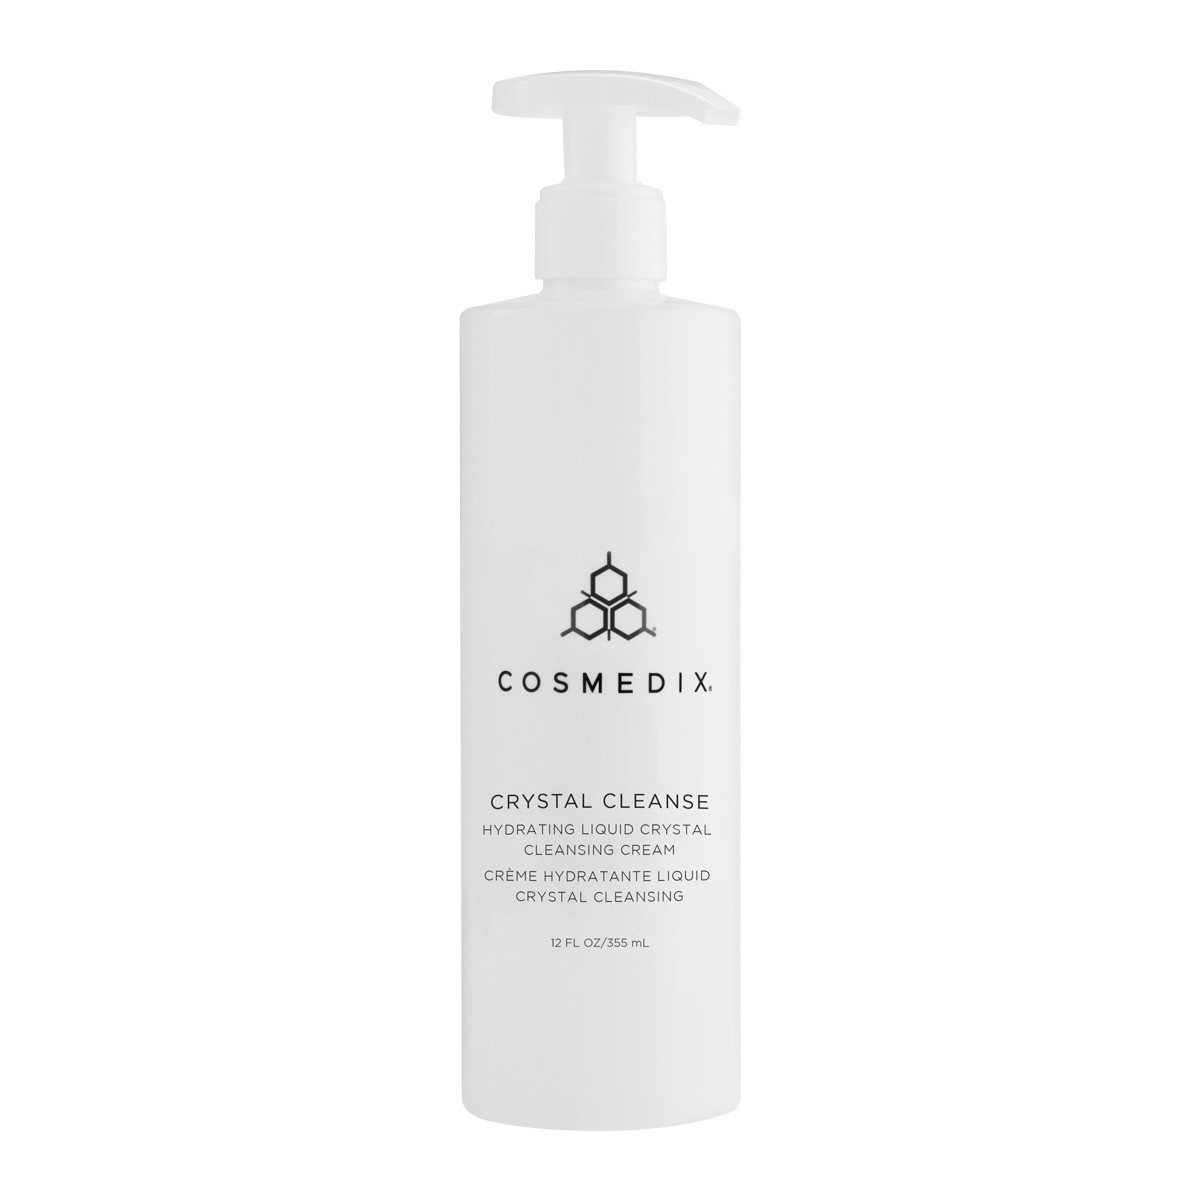 *** Free Gift - Cosmedix Crystal Cleanse